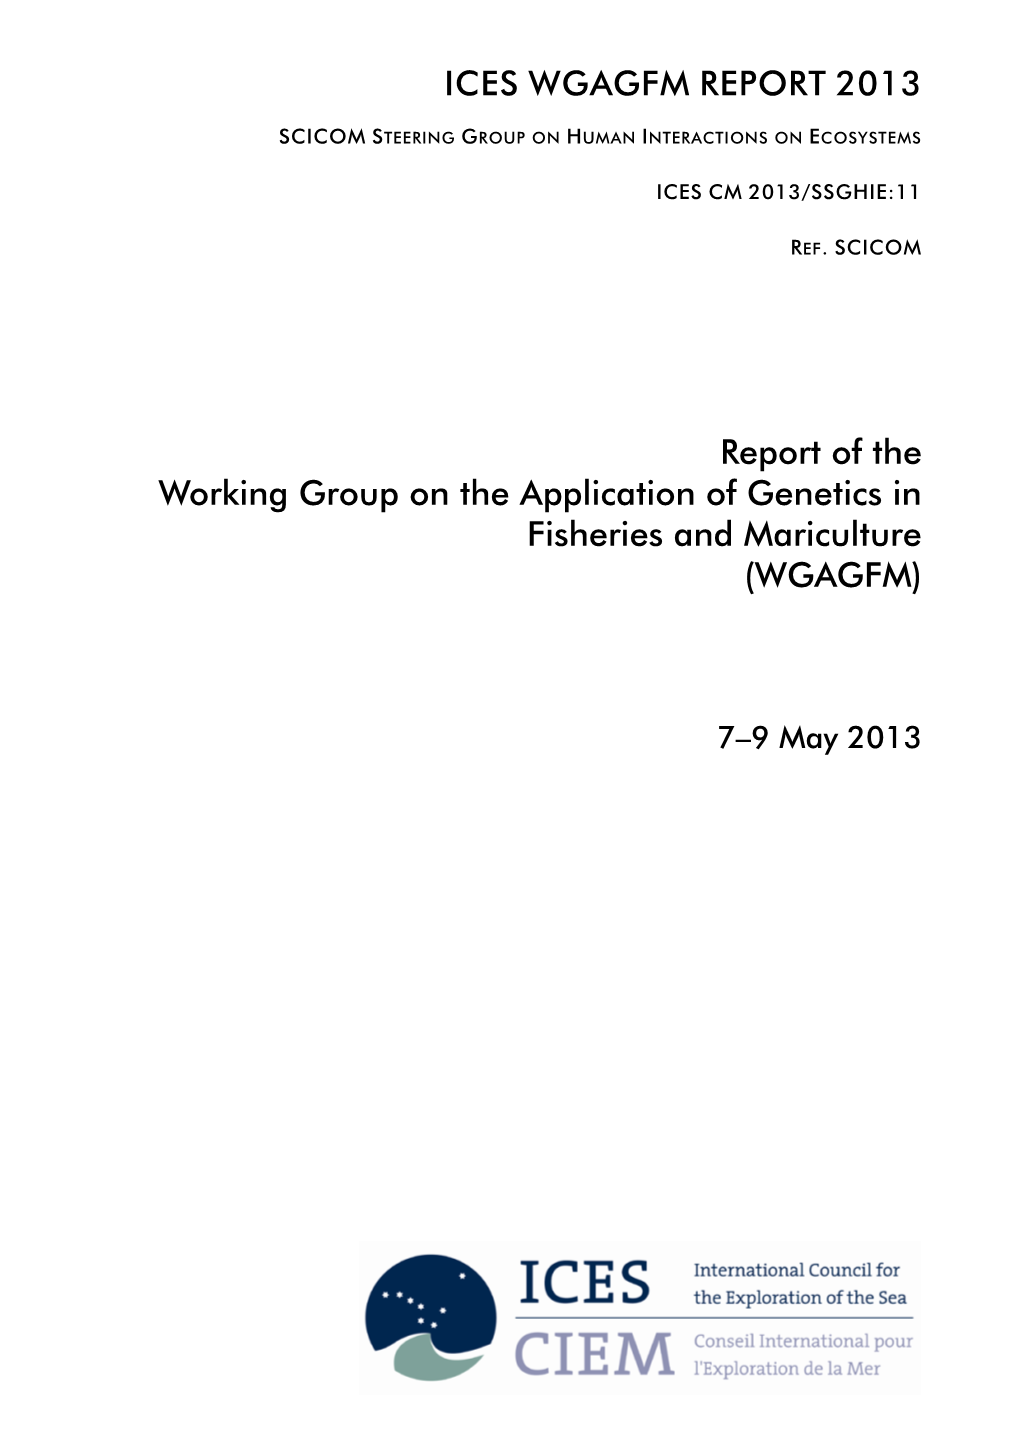 Report of the Working Group on the Application of Genetics in Fisheries and Mariculture (WGAGFM)